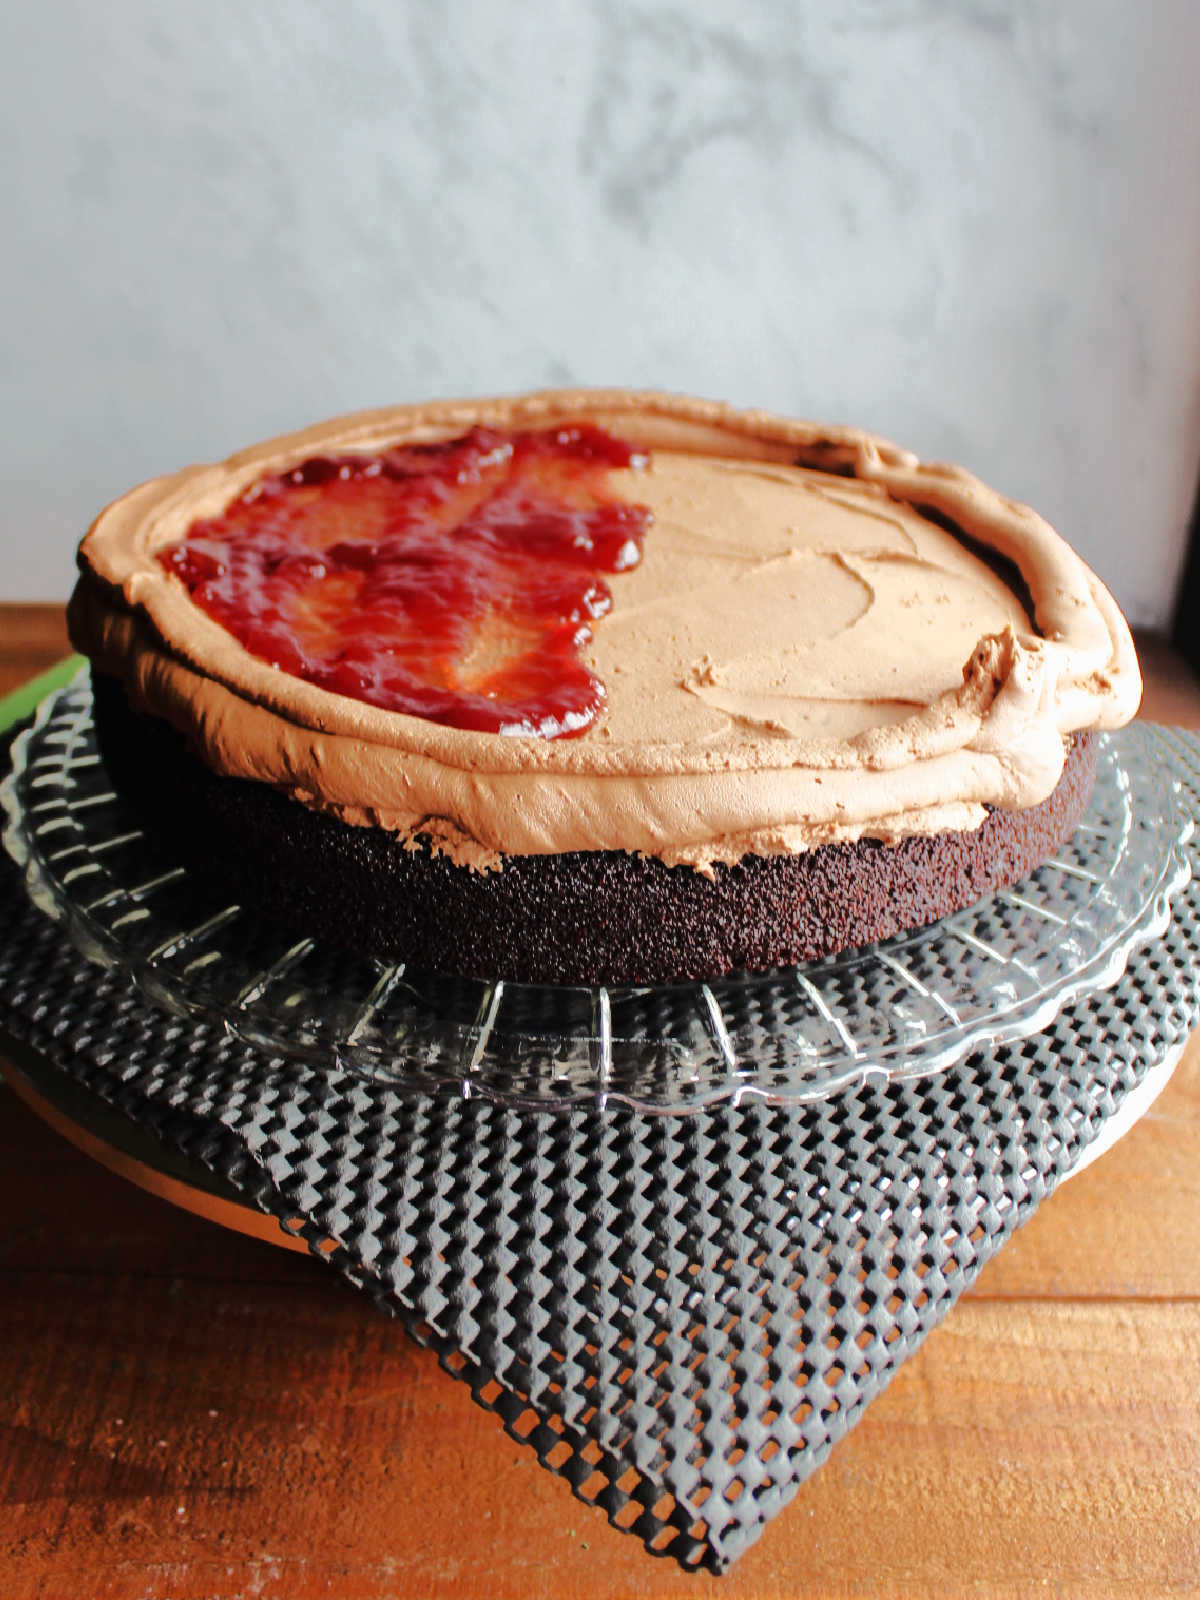 Chocolate cake layer with buttercream spread over the top and a chocolate frosting dam around the edge, starting to spread raspberry filling on the center.